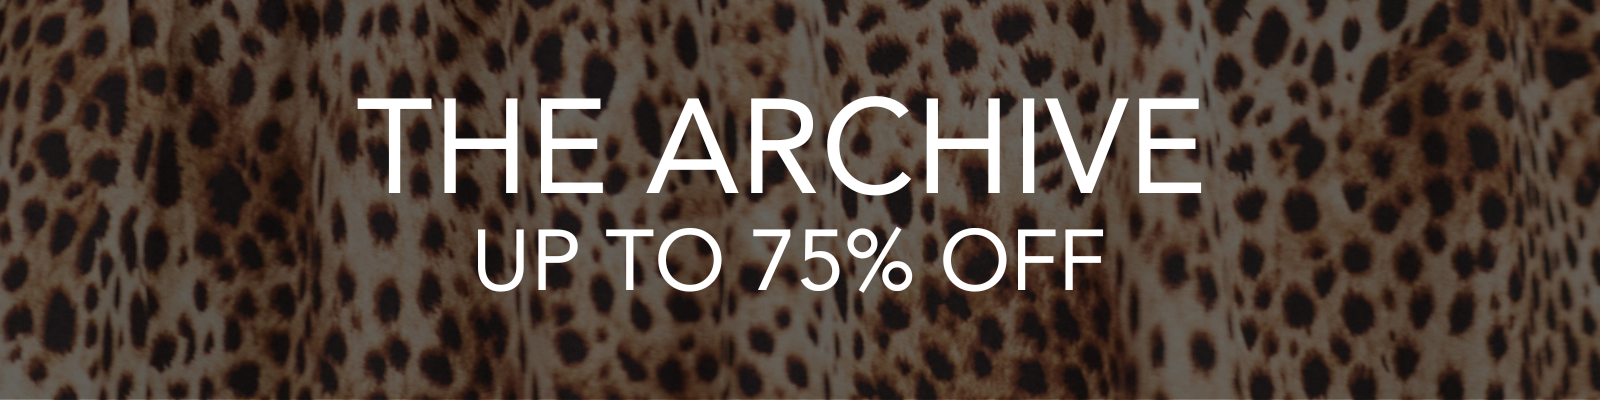 The Archive up to 75% off final sizes, get it or regret it!